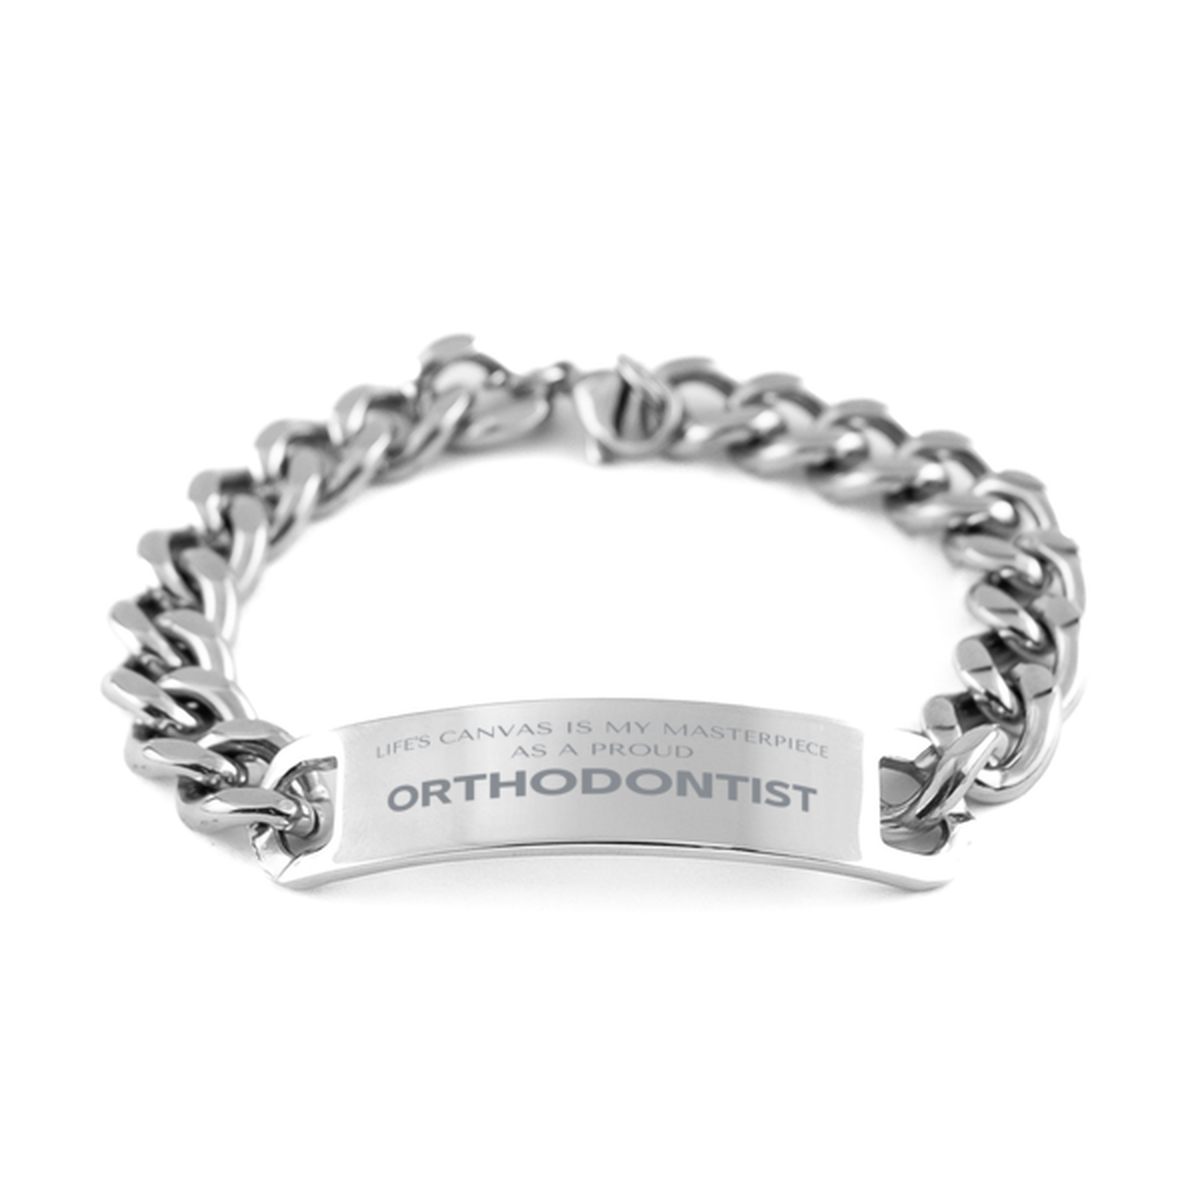 Proud Orthodontist Gifts, Life's canvas is my masterpiece, Epic Birthday Christmas Unique Cuban Chain Stainless Steel Bracelet For Orthodontist, Coworkers, Men, Women, Friends